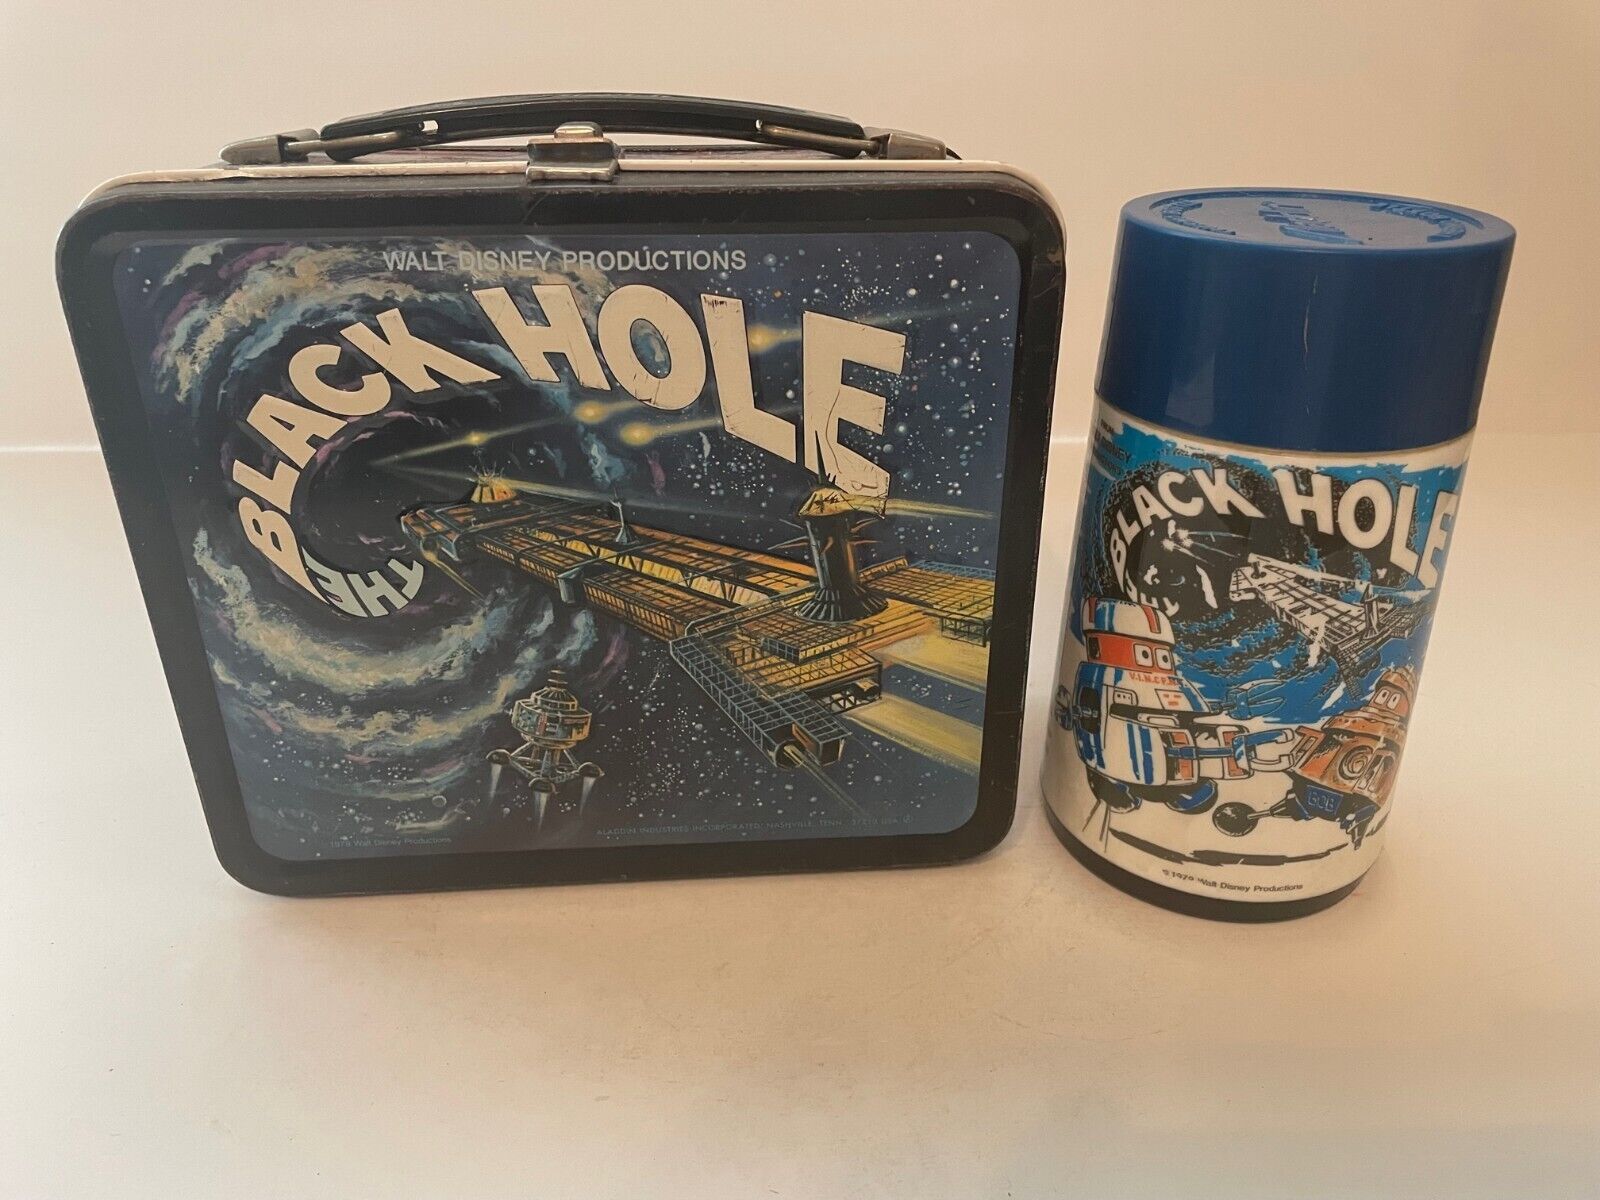 Vintage 1979 Aladdin Disney The Black Hole Metal Lunchbox Complete With Thermos